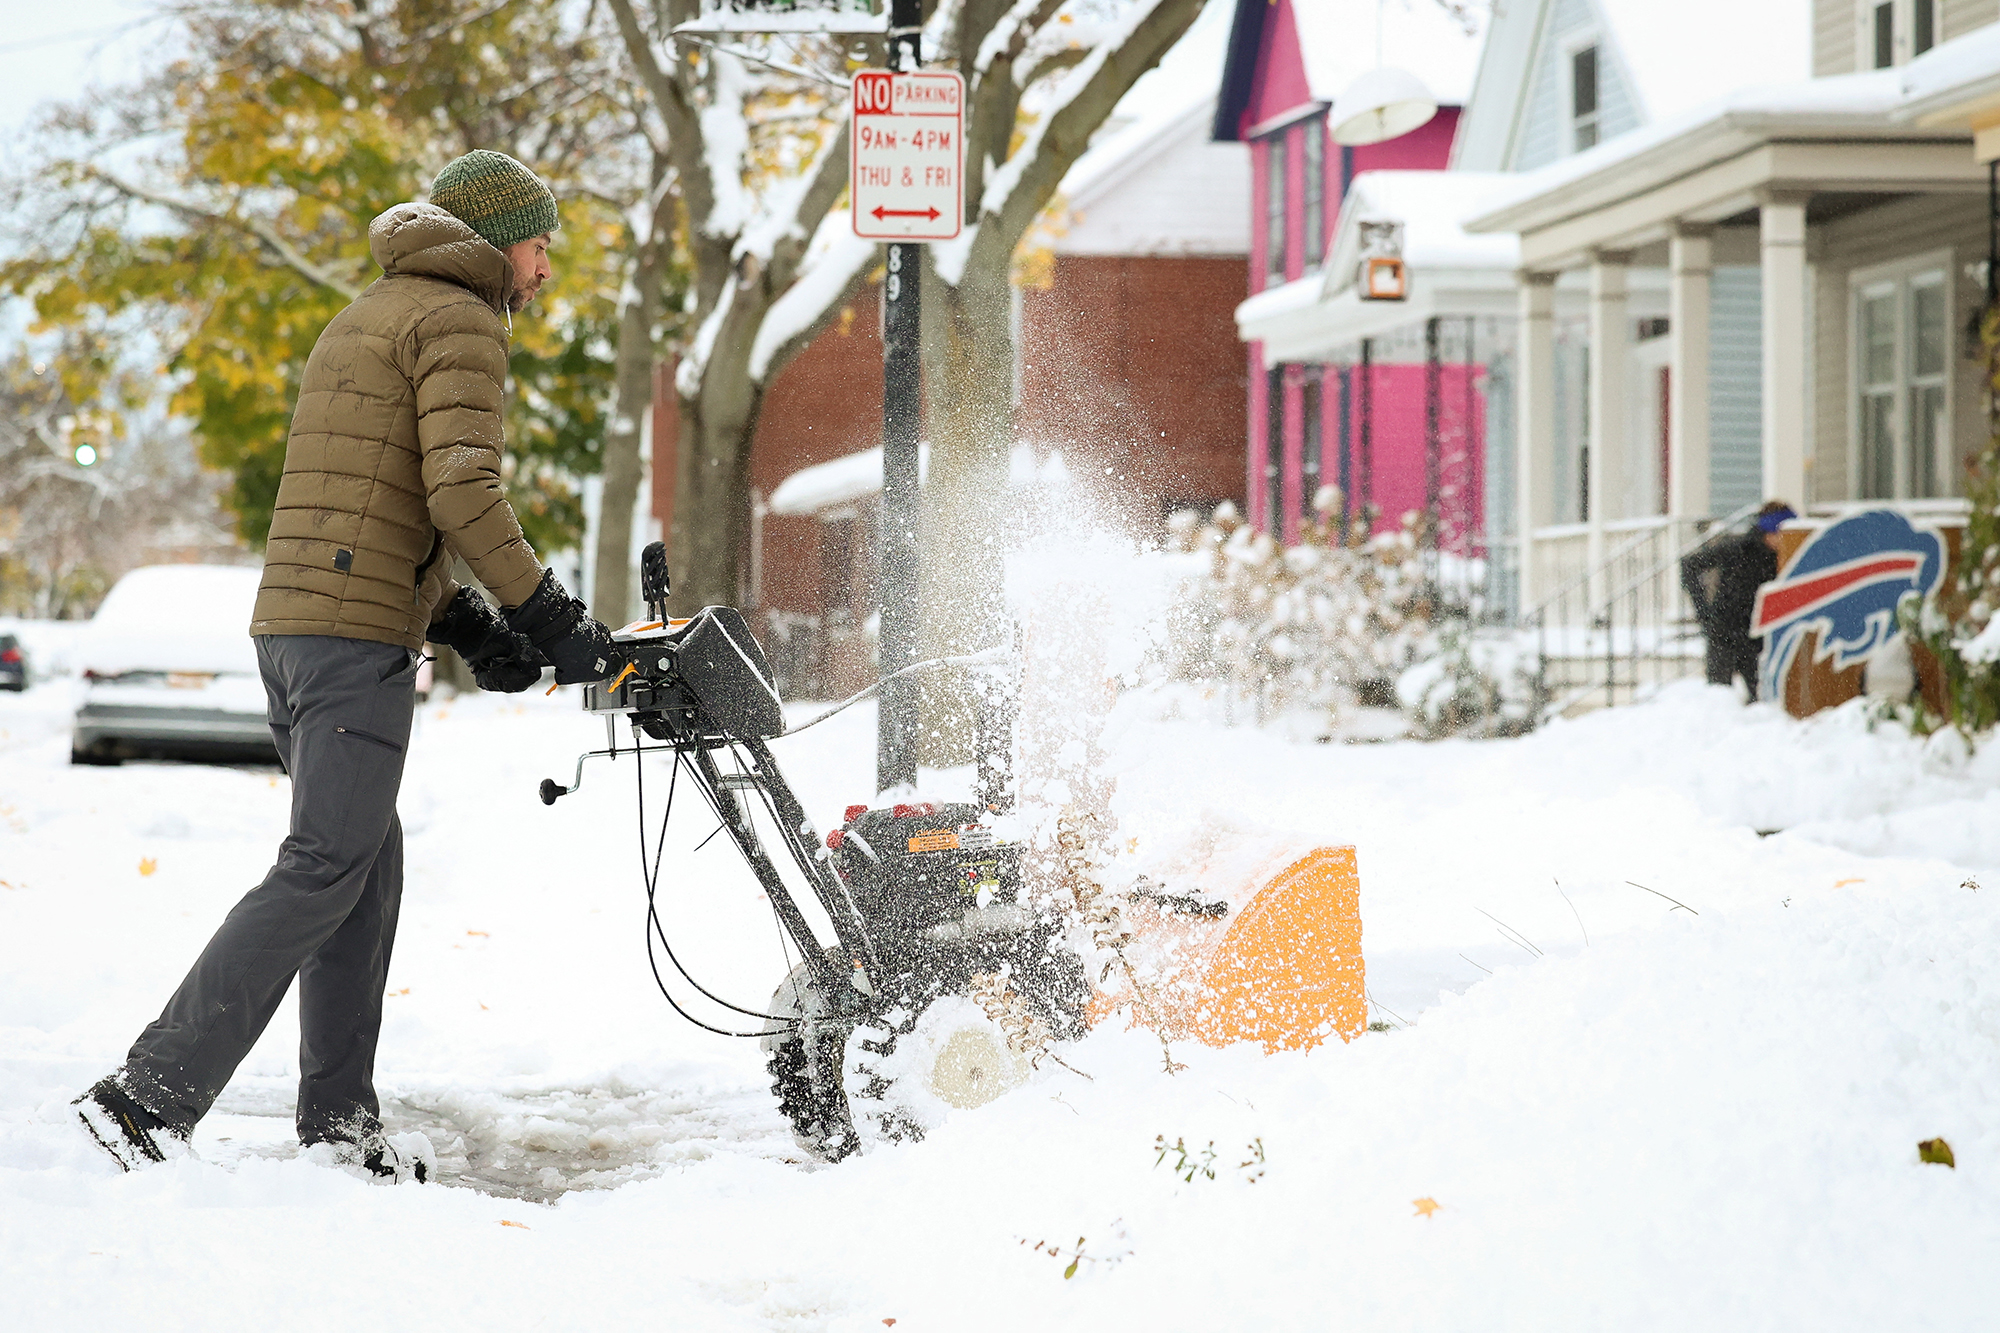 A resident plows his driveway during a snowstorm as extreme winter weather hits Buffalo, New York, Friday.